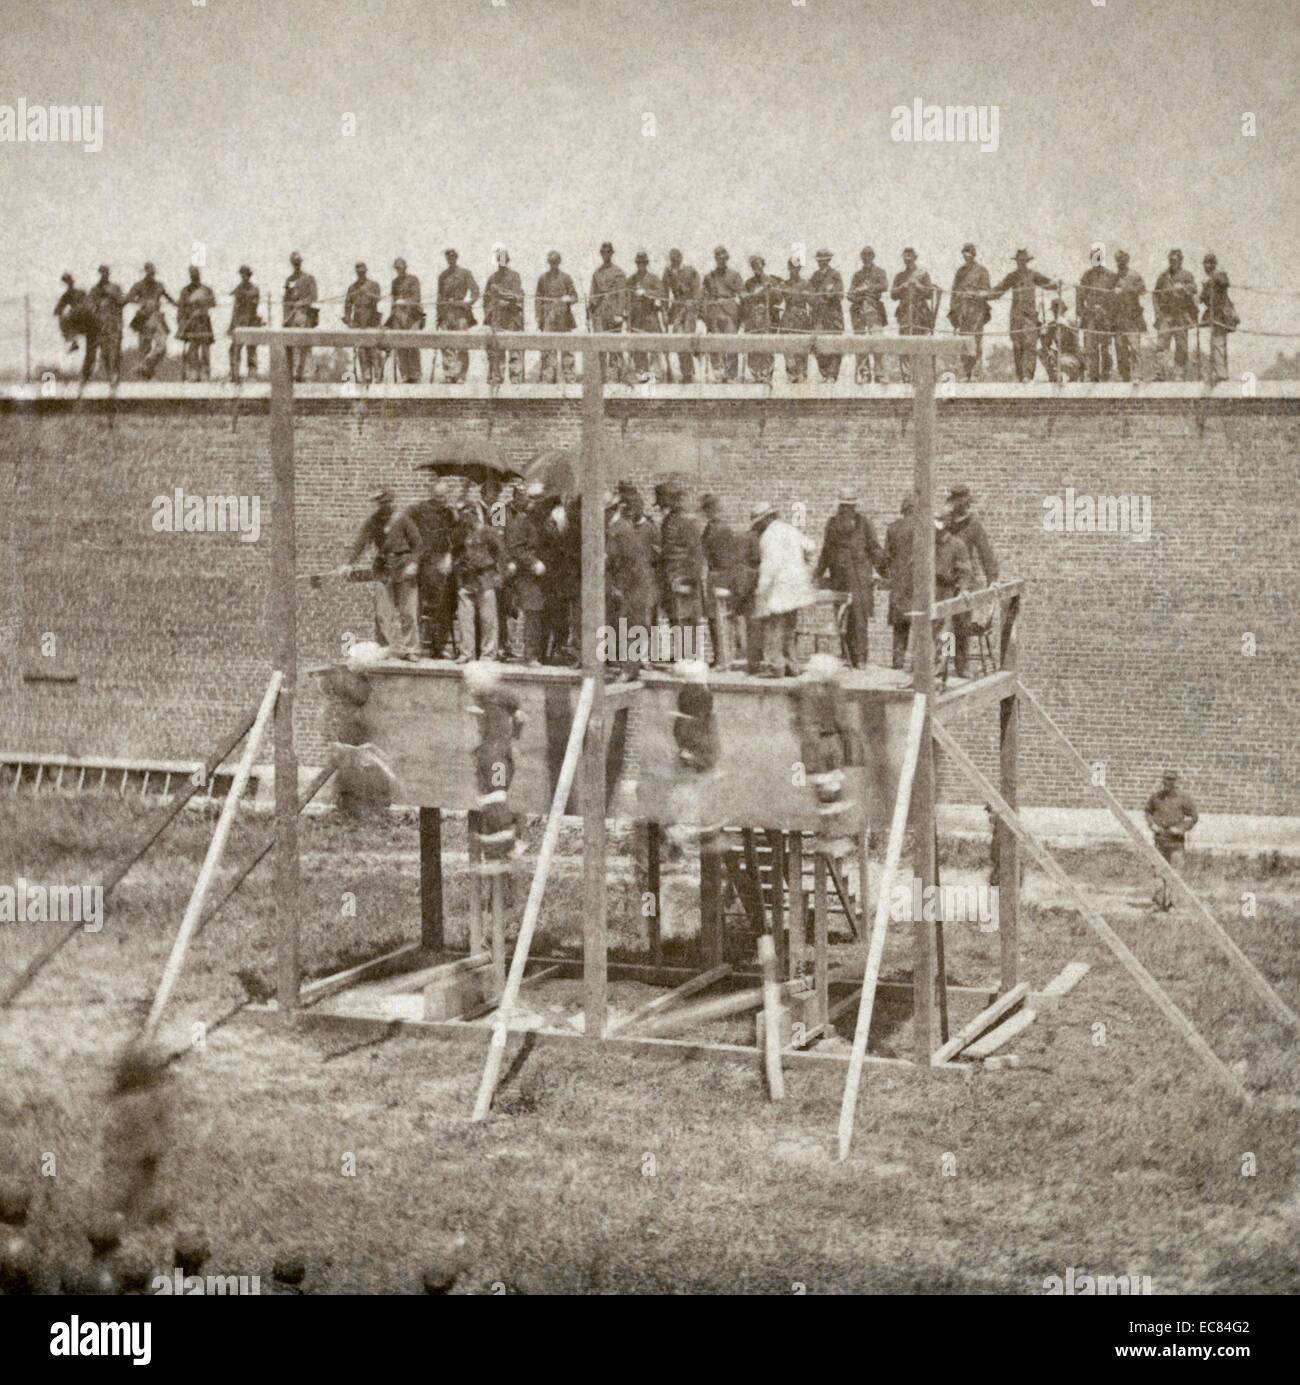 Photograph captures the moment just after the drop of the Lincoln Conspirators. Alexander Gardner (1821-1882) and his assistant captured the execution of the conspirtators of the assasination of the American President Abraham Lincoln (1809-1865) Gardner’s camera captures the moment just after the drop. Dated 1865 Stock Photo